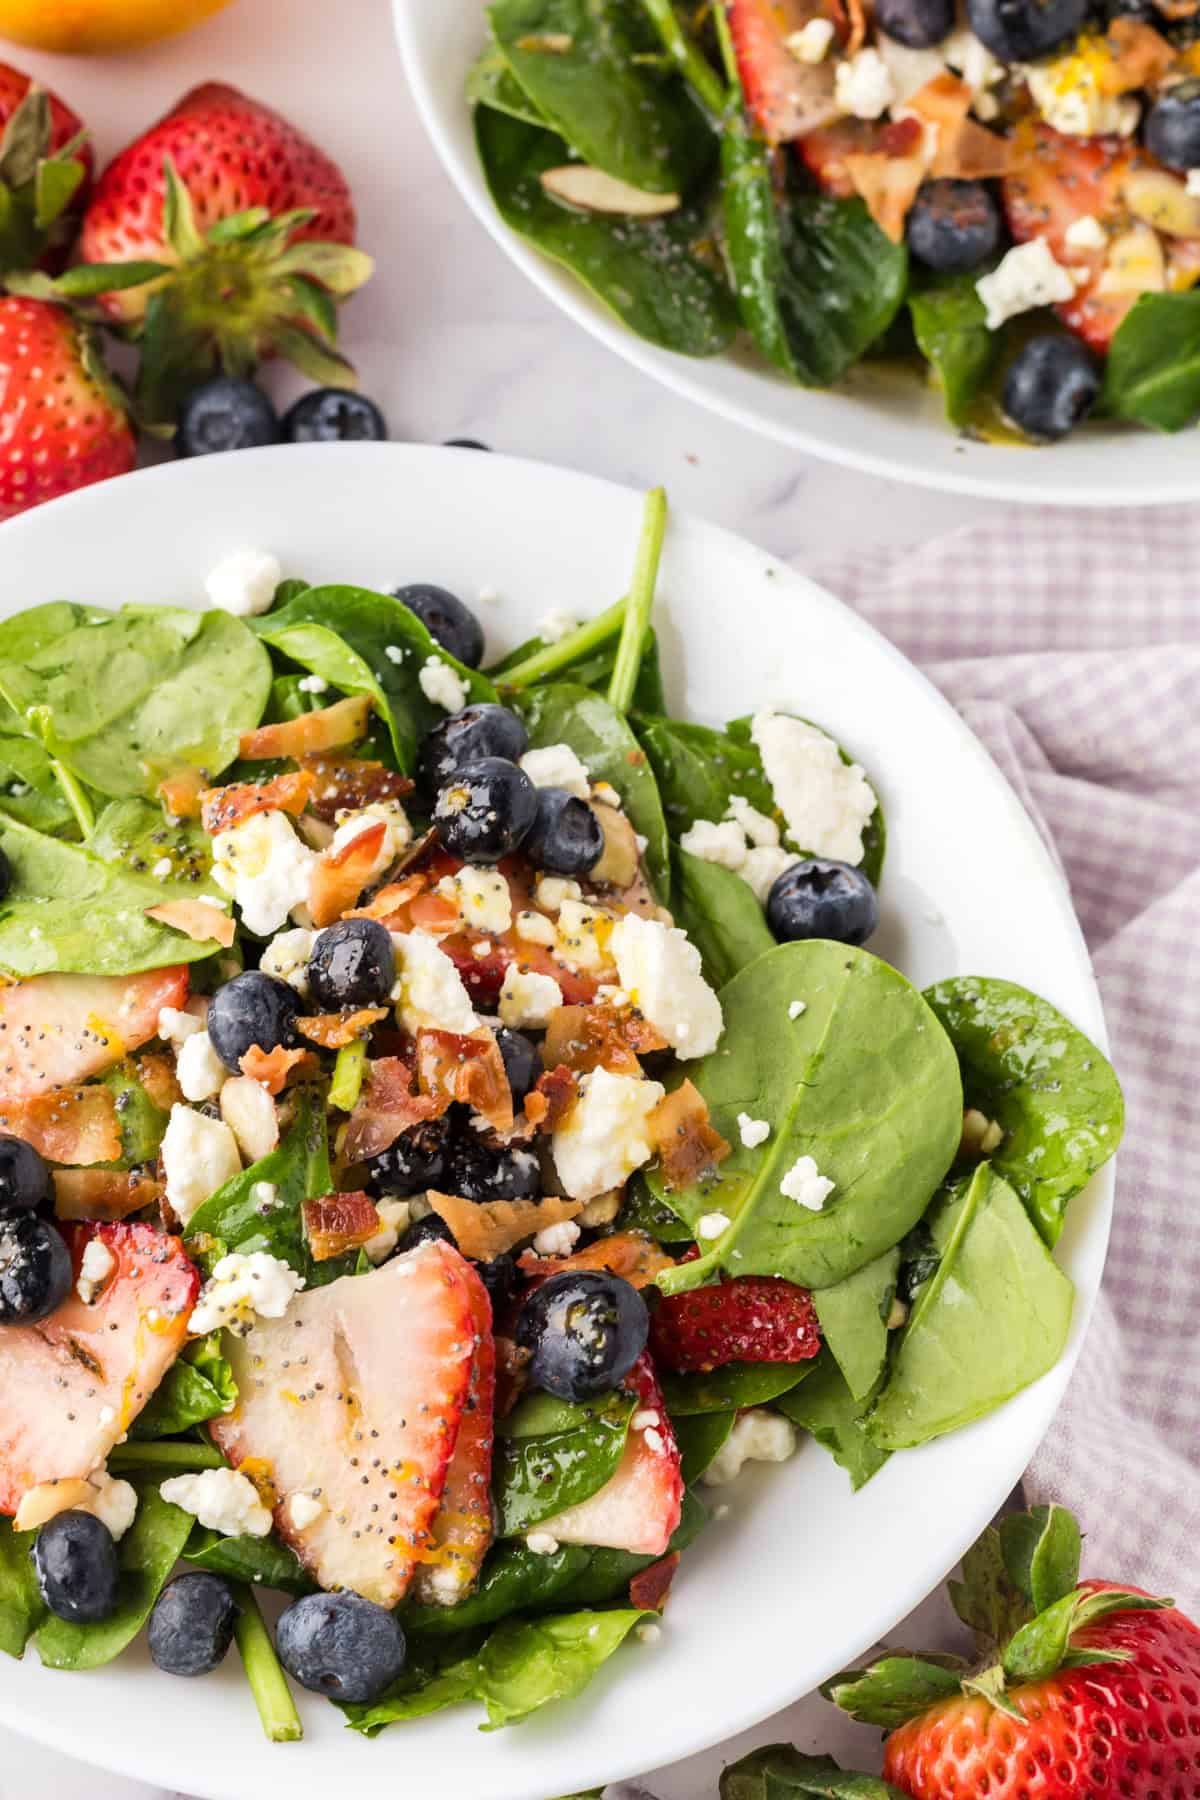 spinach and berry salad on a round white plate with black forks to the side.